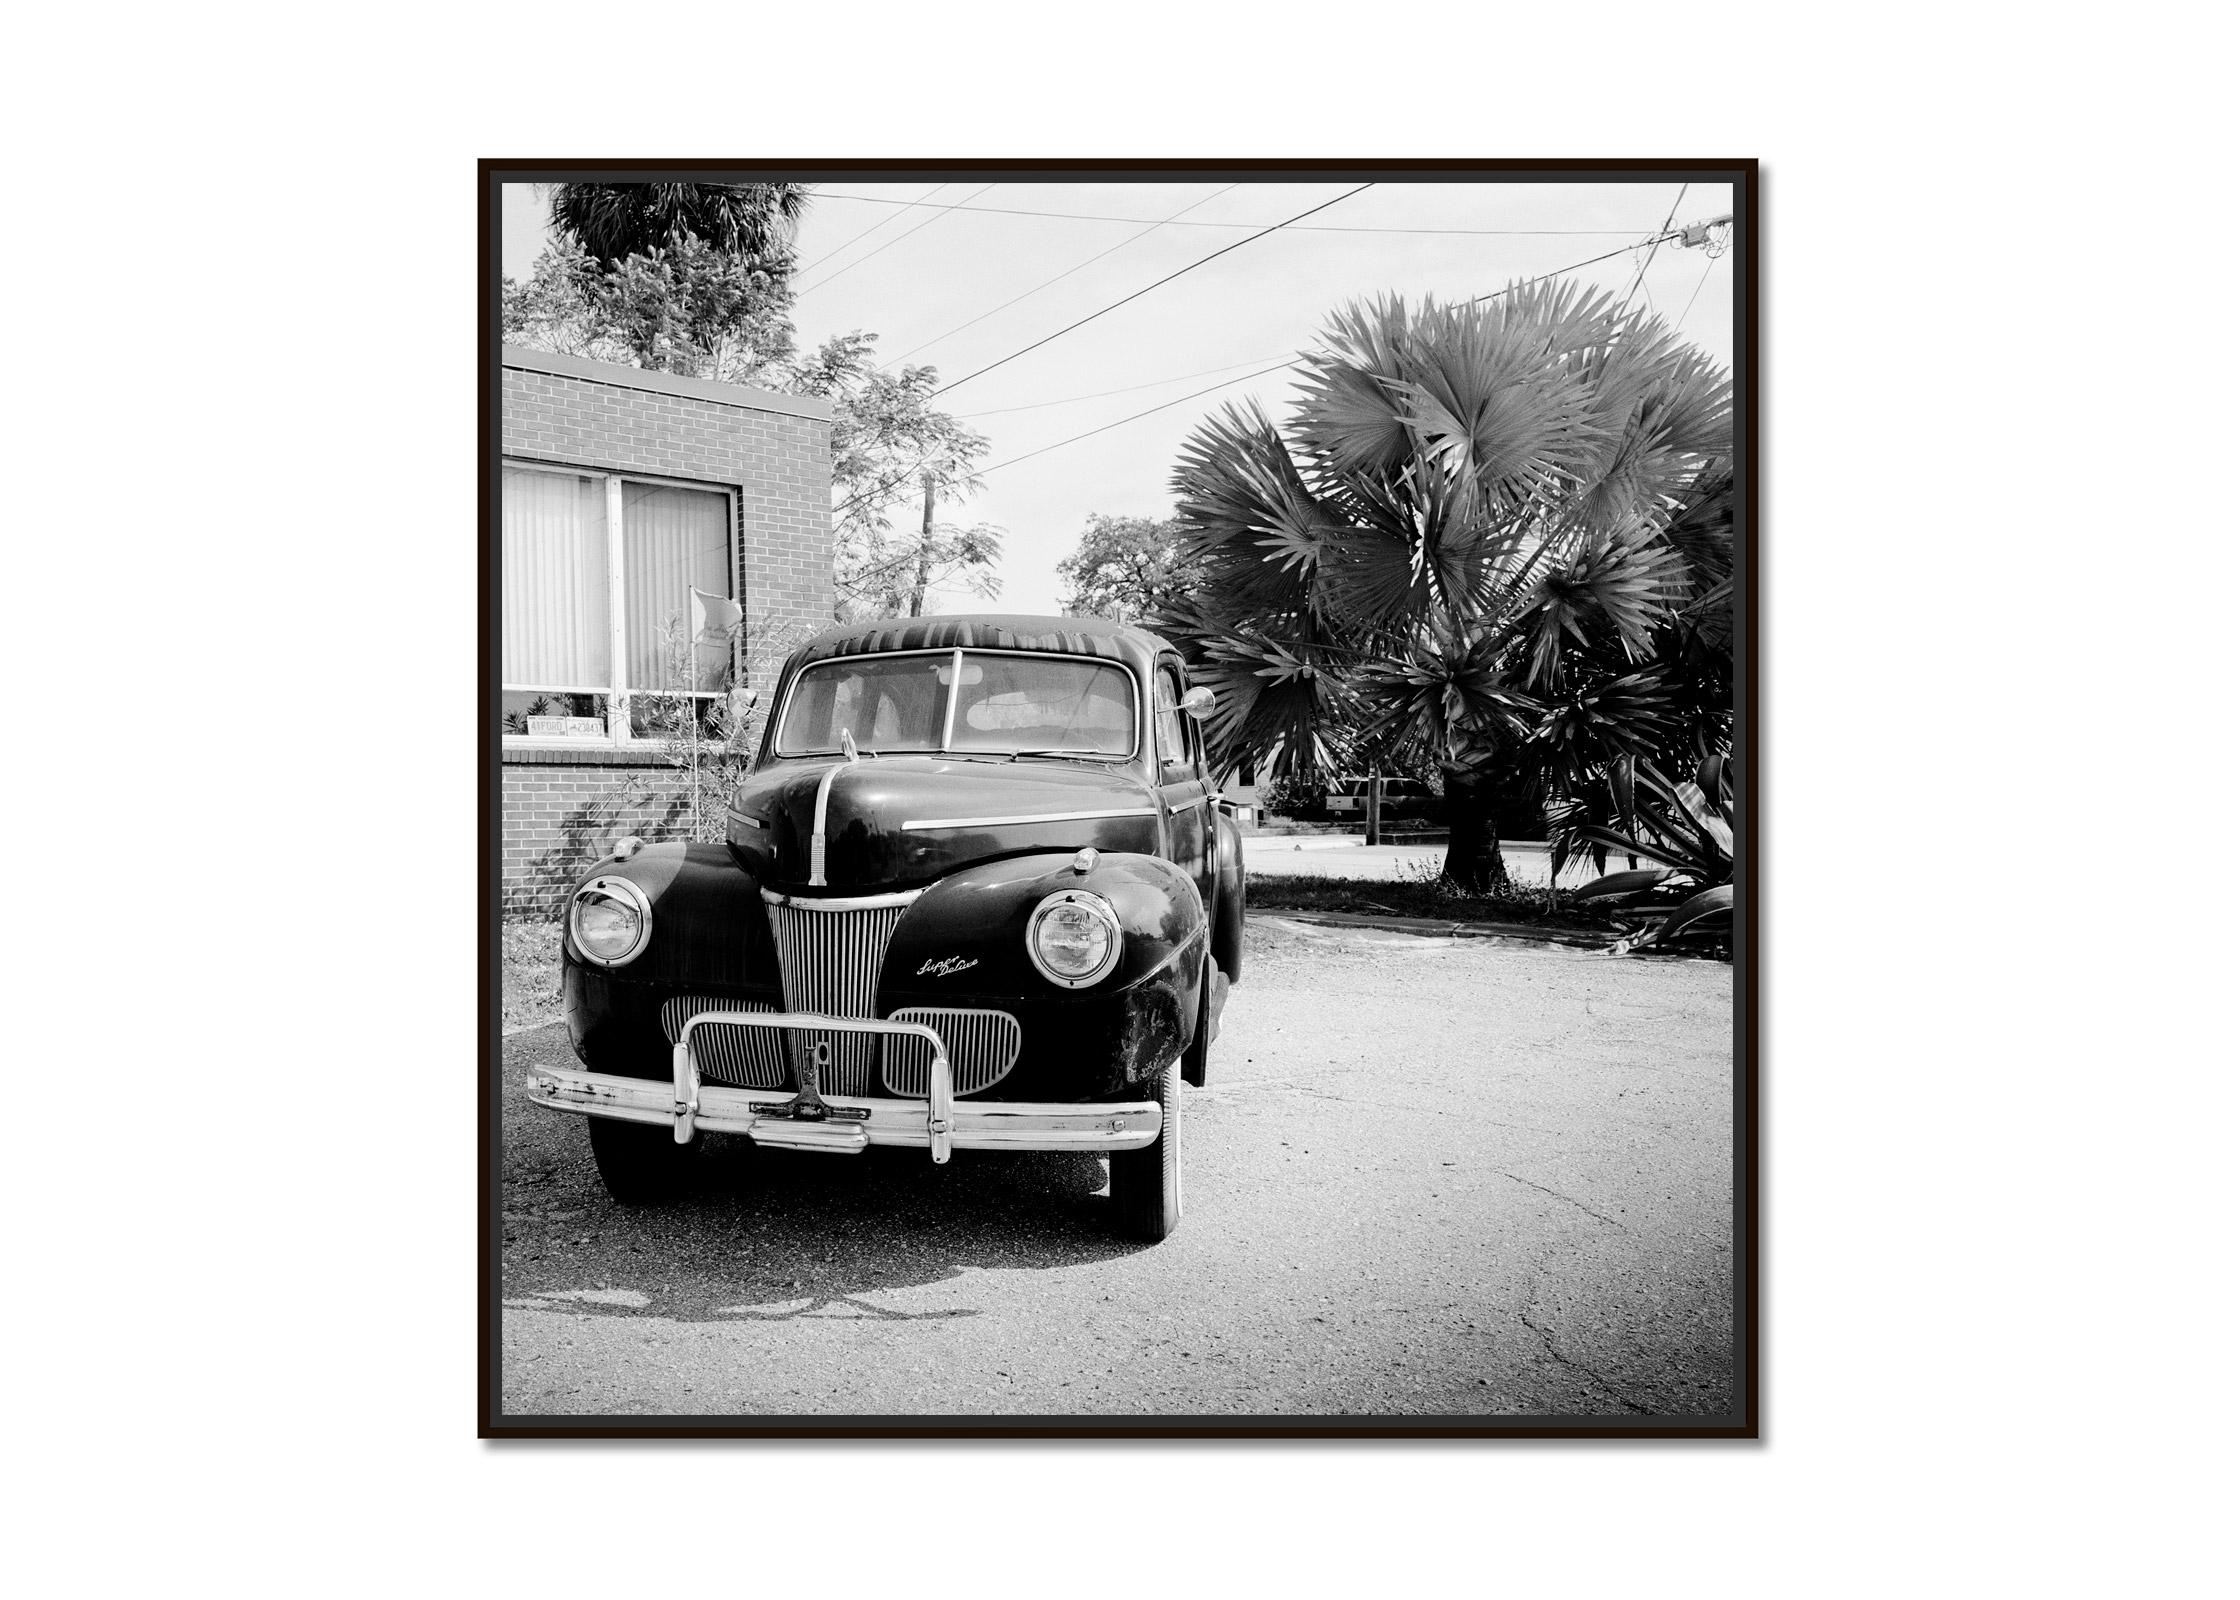 1941 Ford Super Deluxe Business Coupe, USA, black & white photography, landscape - Photograph by Gerald Berghammer